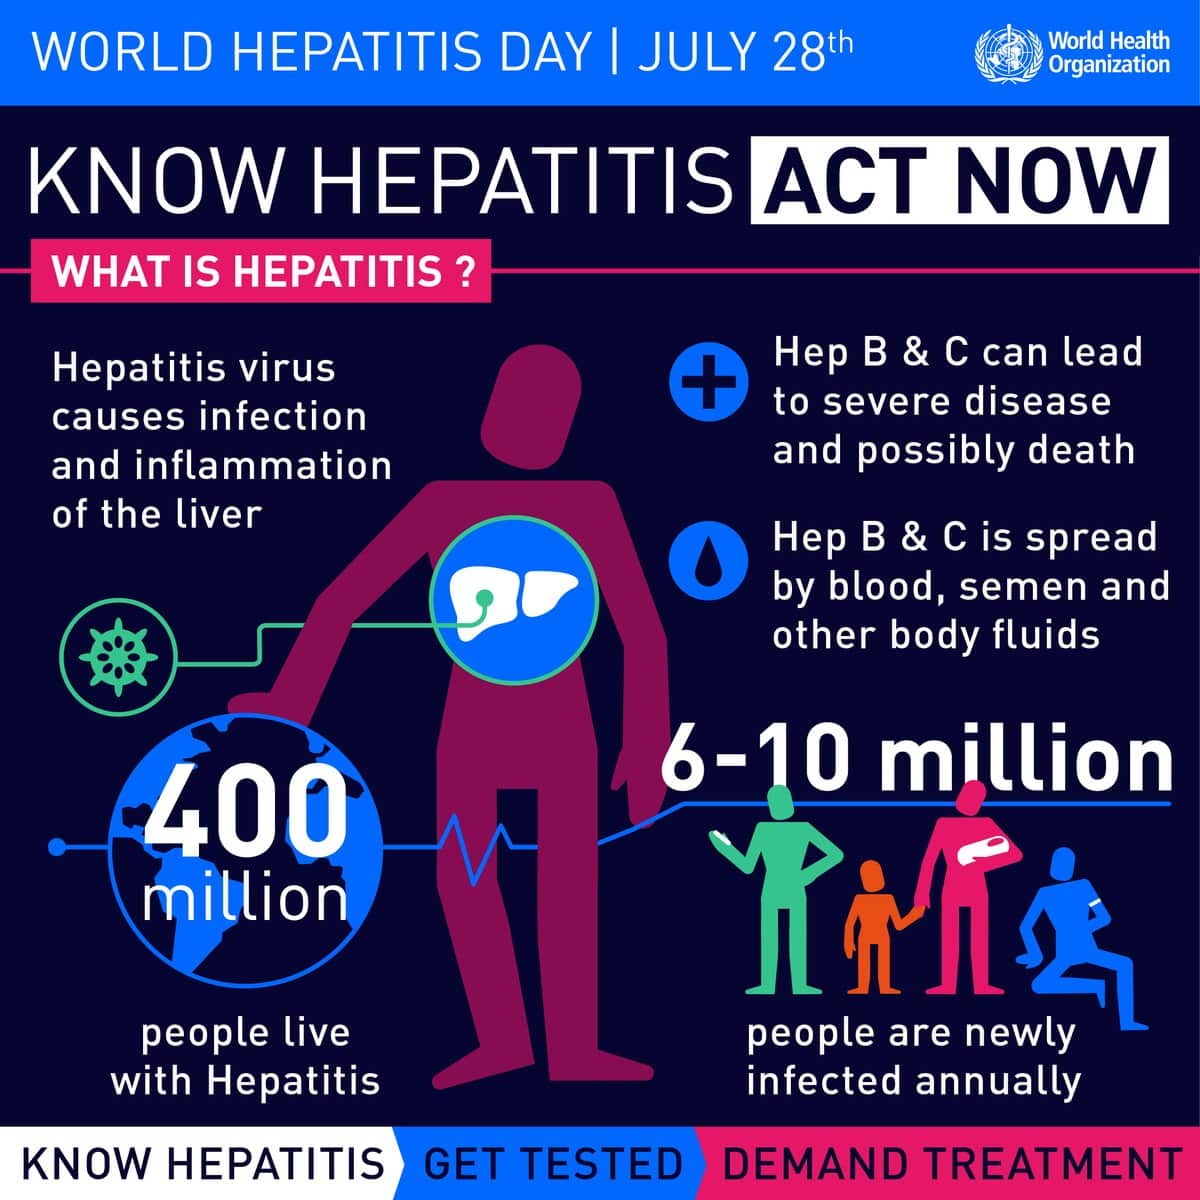 WORLD HEPATITIS DAY 2020 â Find The Missing Millions!